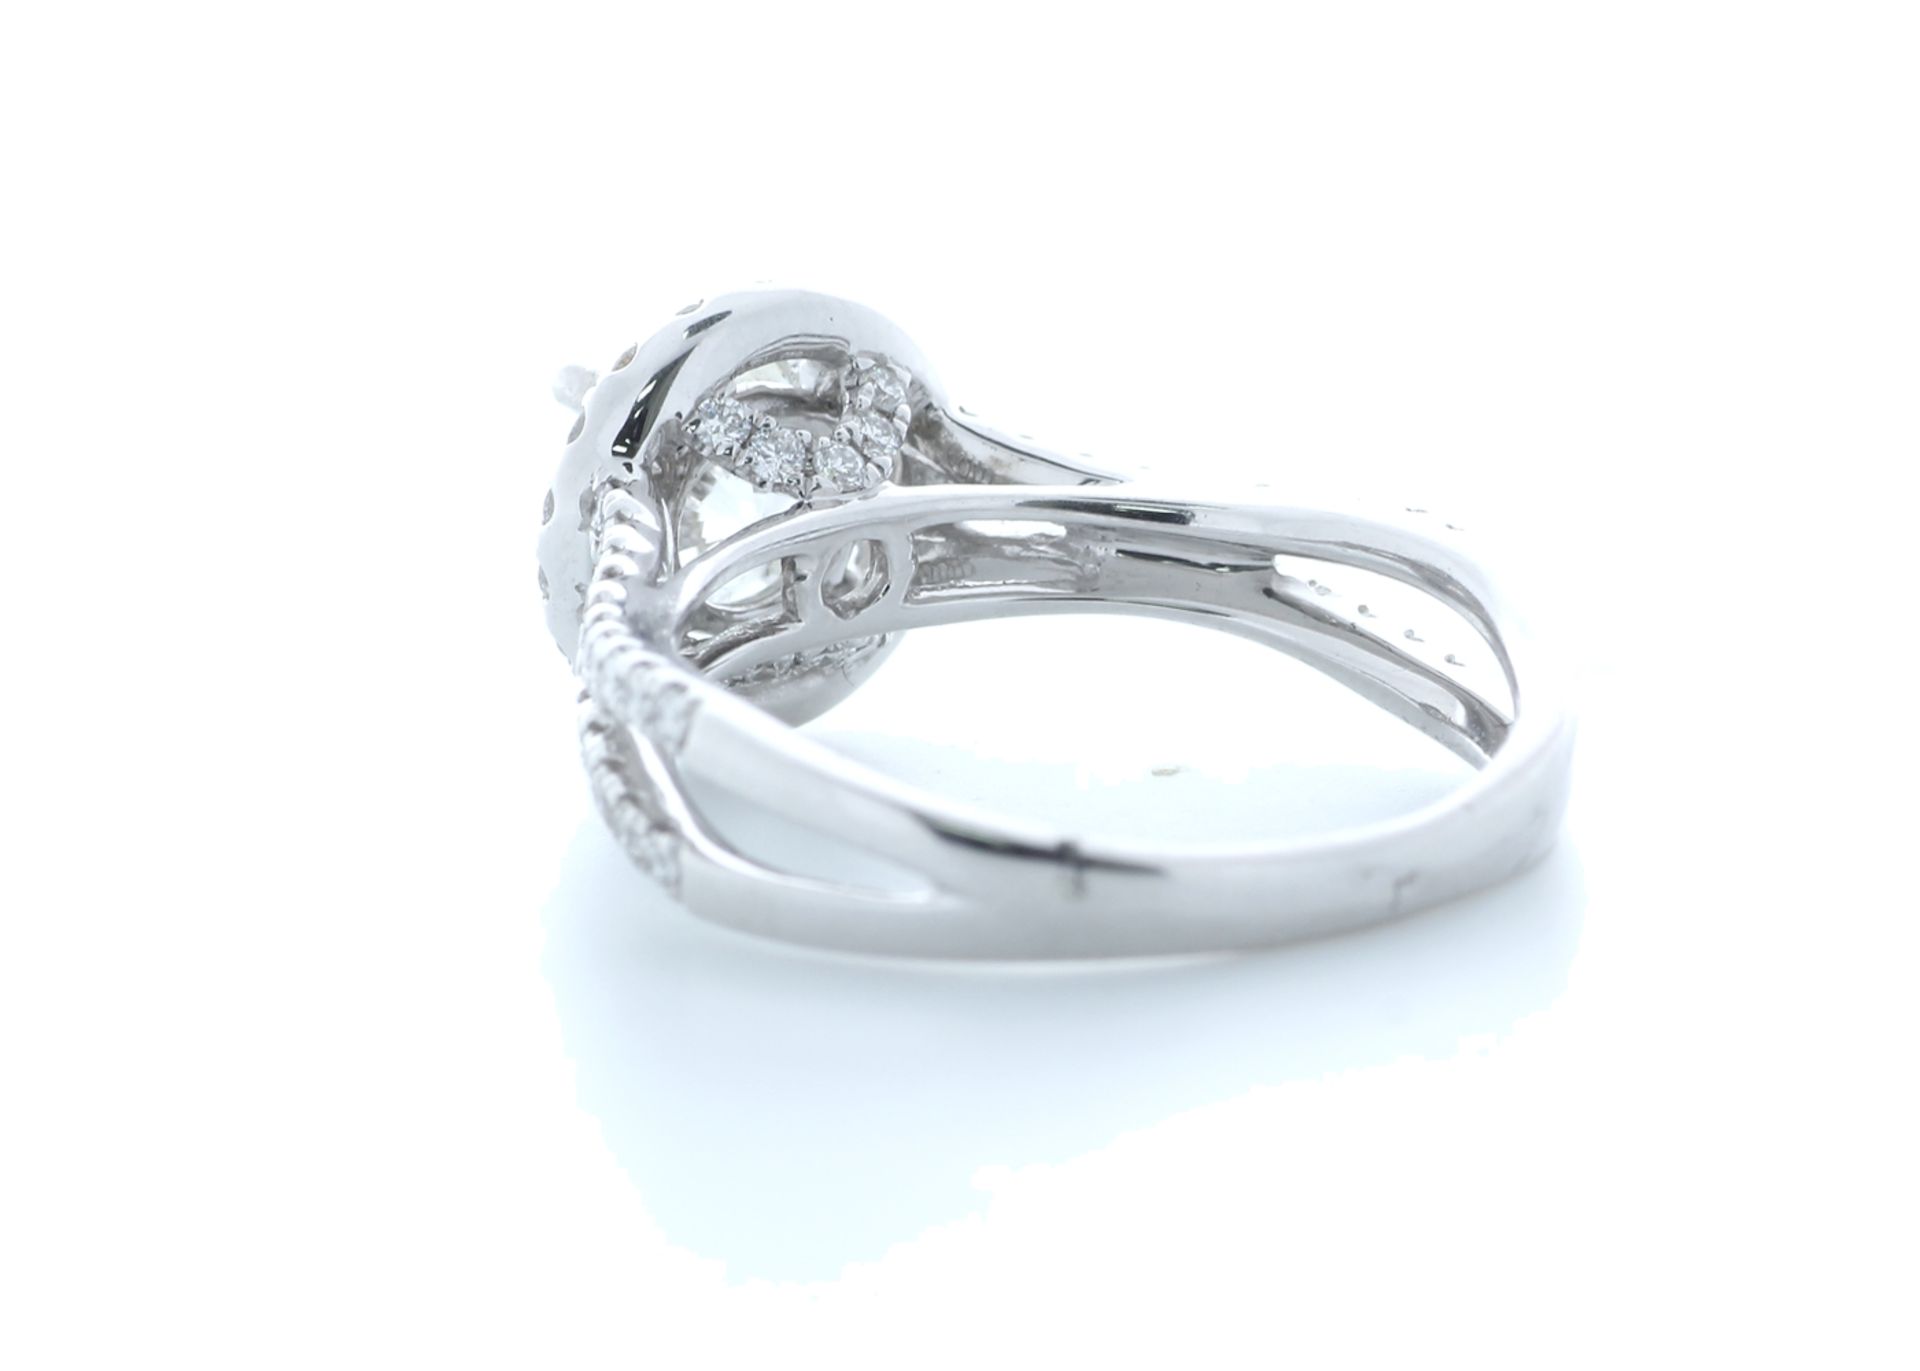 18ct White Gold Single Stone With Halo Setting Ring 1.55 (1.00) Carats - Valued by IDI £22,000. - Image 3 of 5